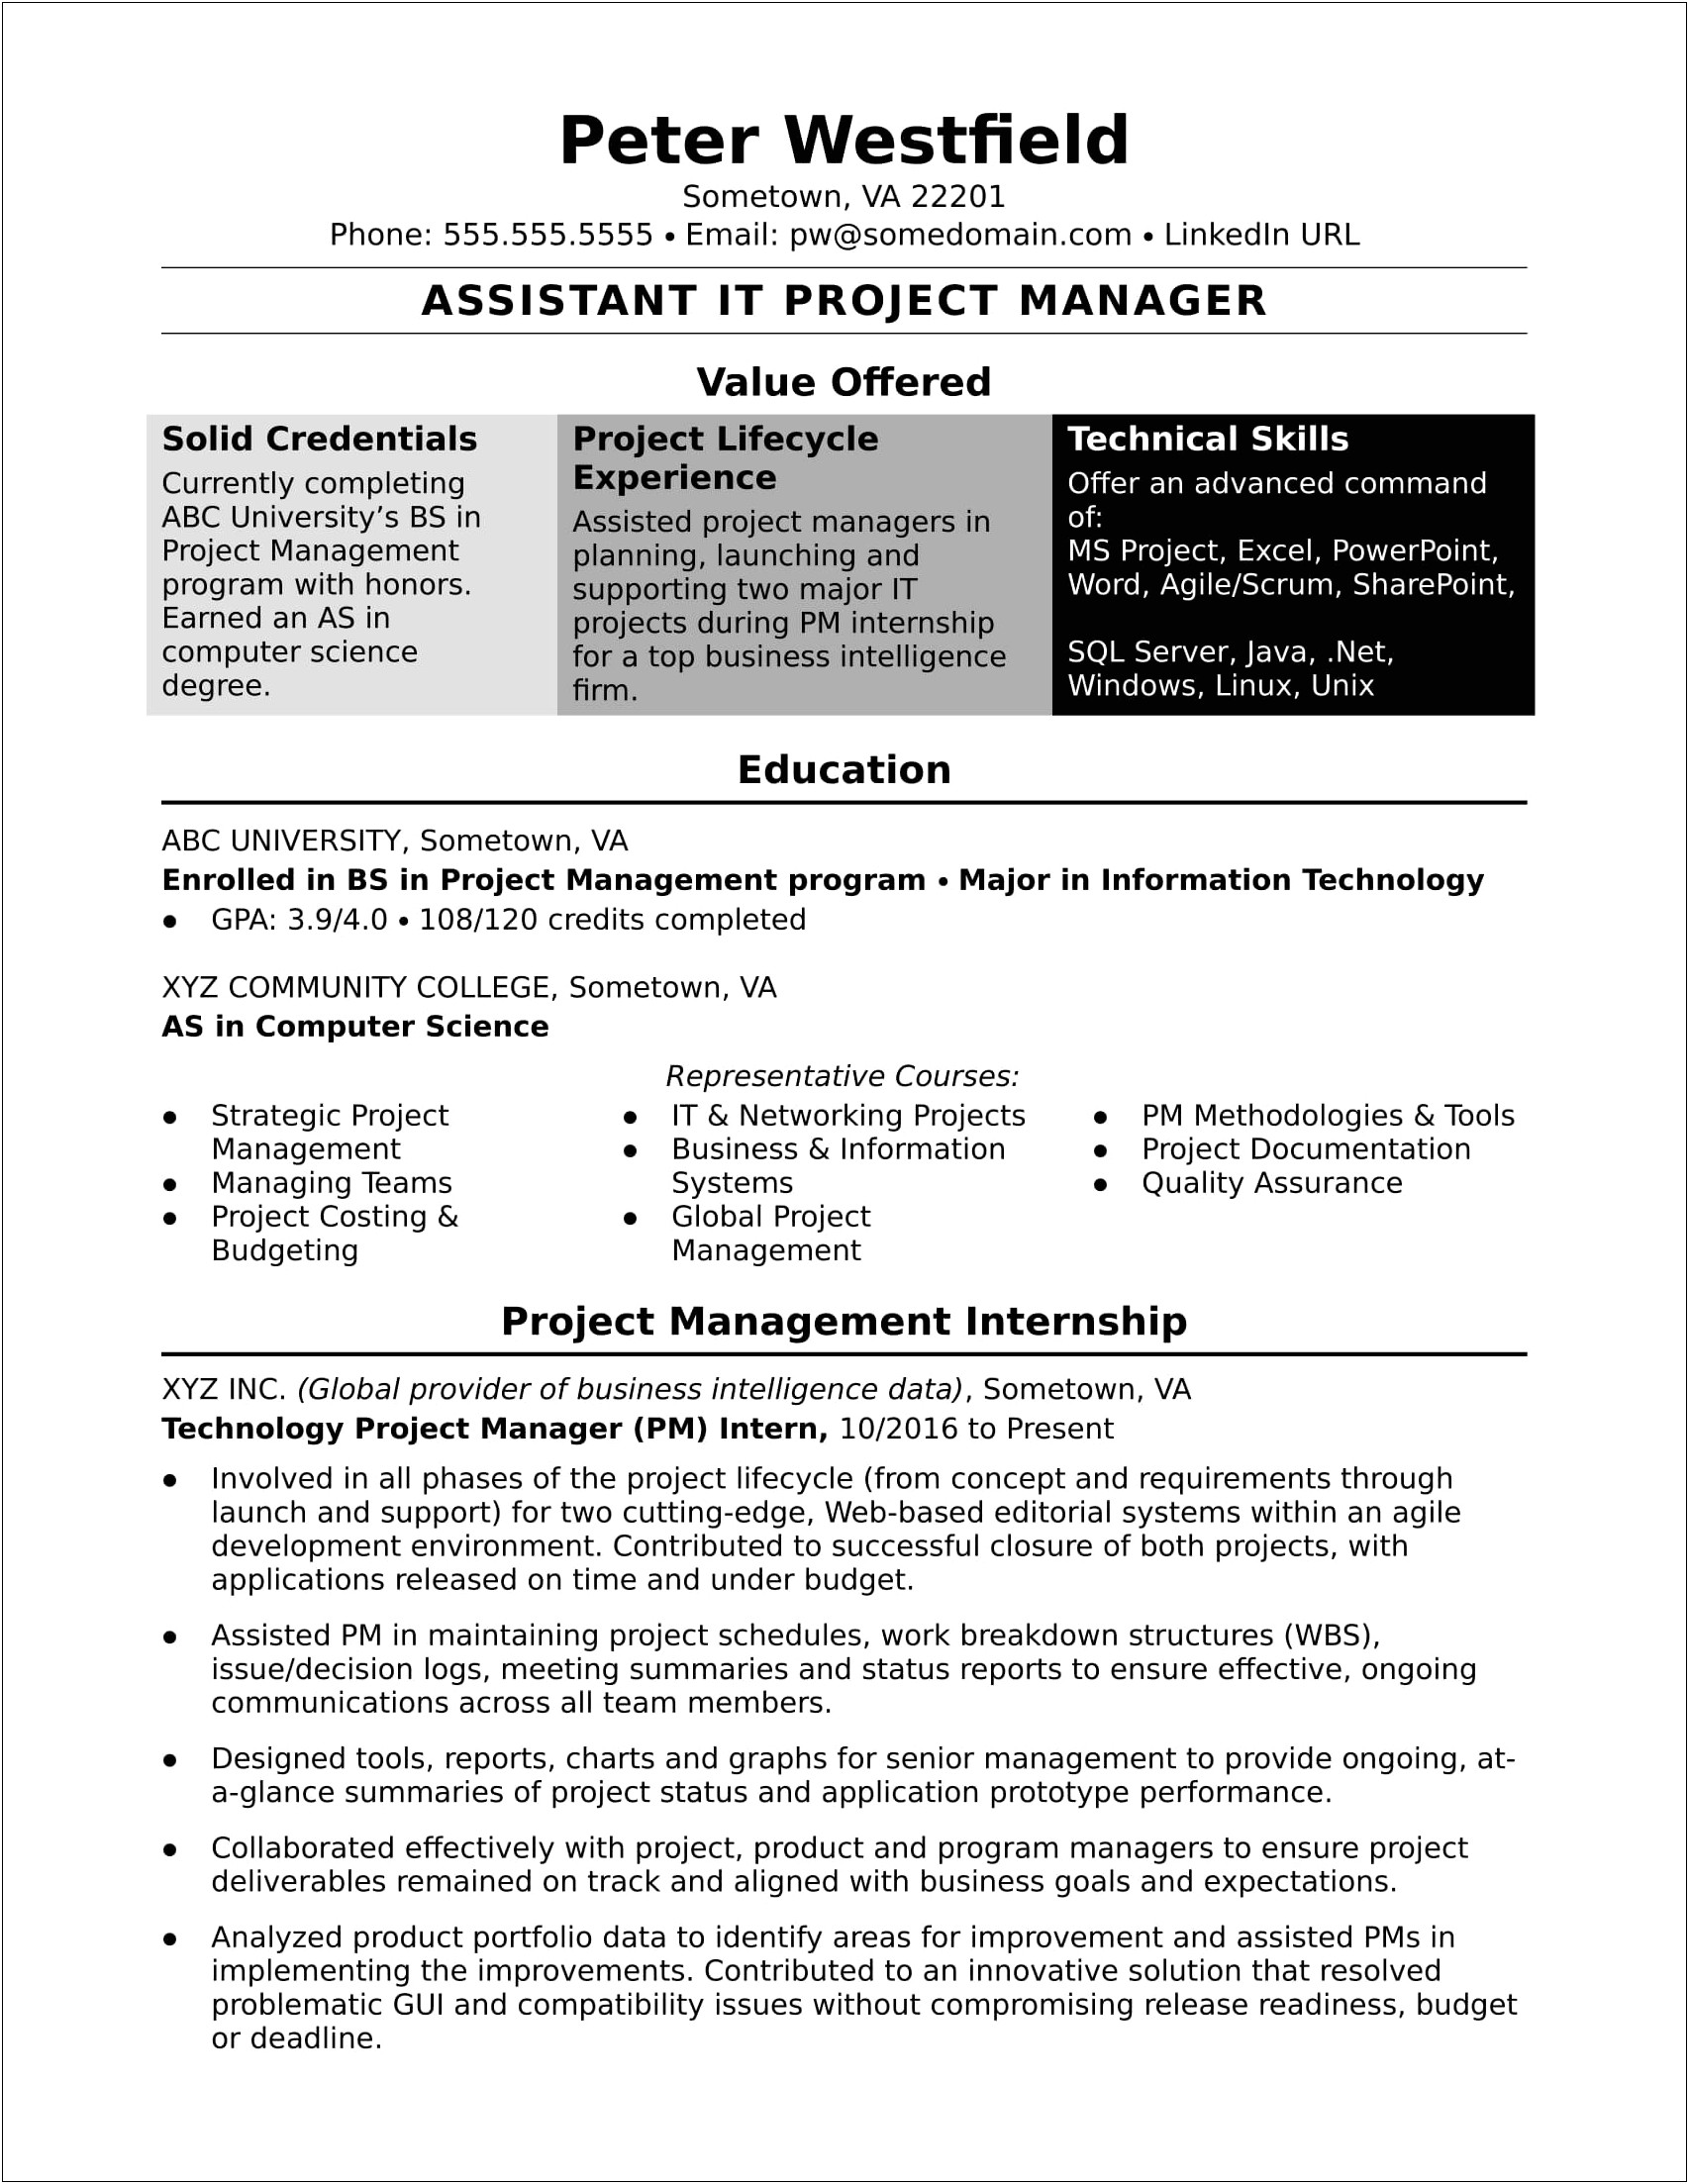 Resume Tips For Project Manager